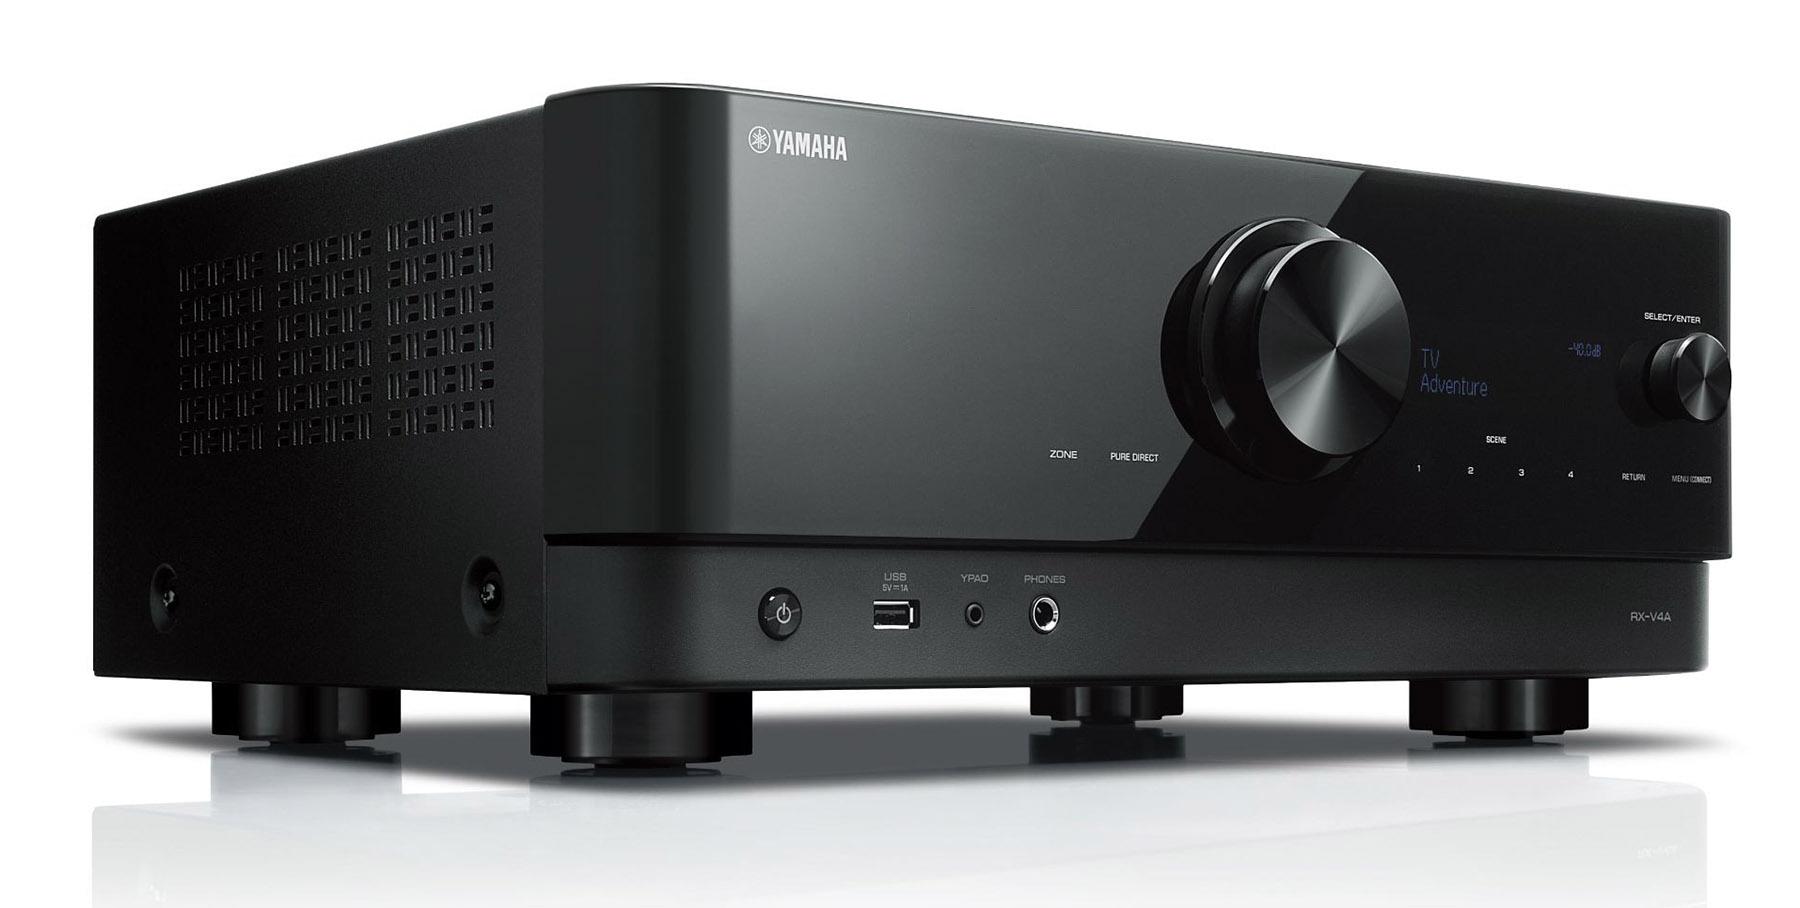 The least expensive of Yamaha’s new generation of AV receivers has features and performance that once cost thousands, and some that will keep it current for years. receiver 3133f26b yahamarx v4afront